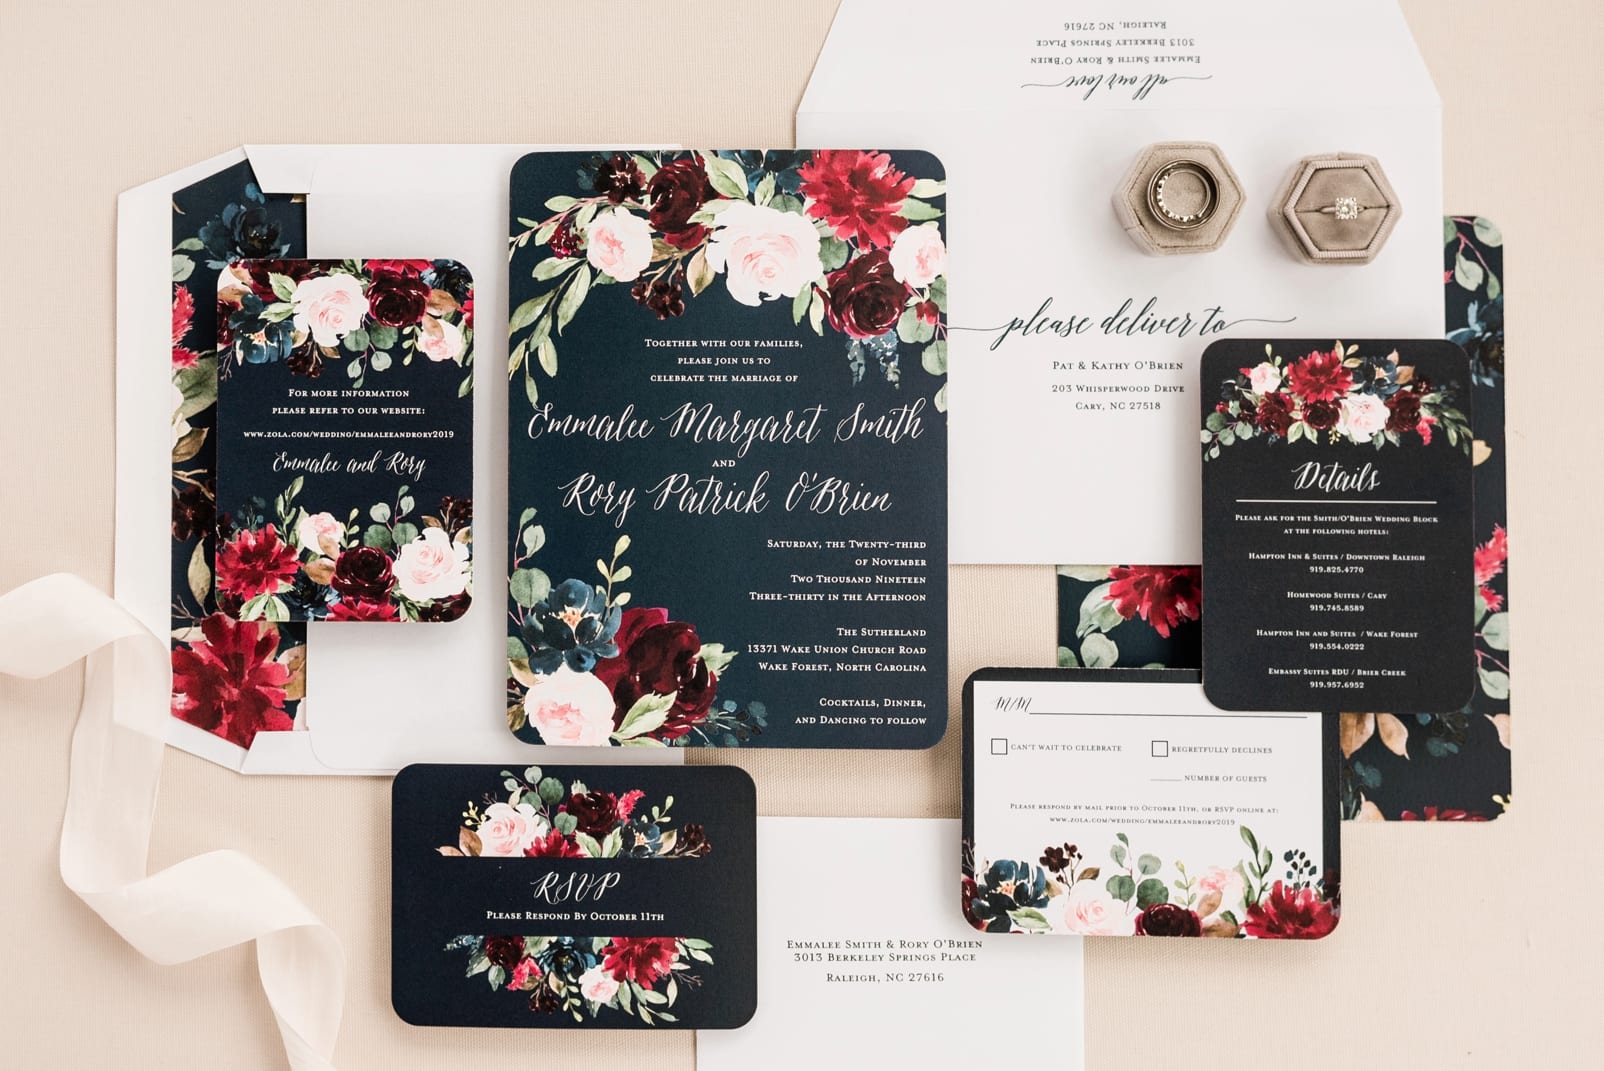 Shutterfly wedding invitation suite black background with white script and deep red and light pink floral decorations in the corner photo